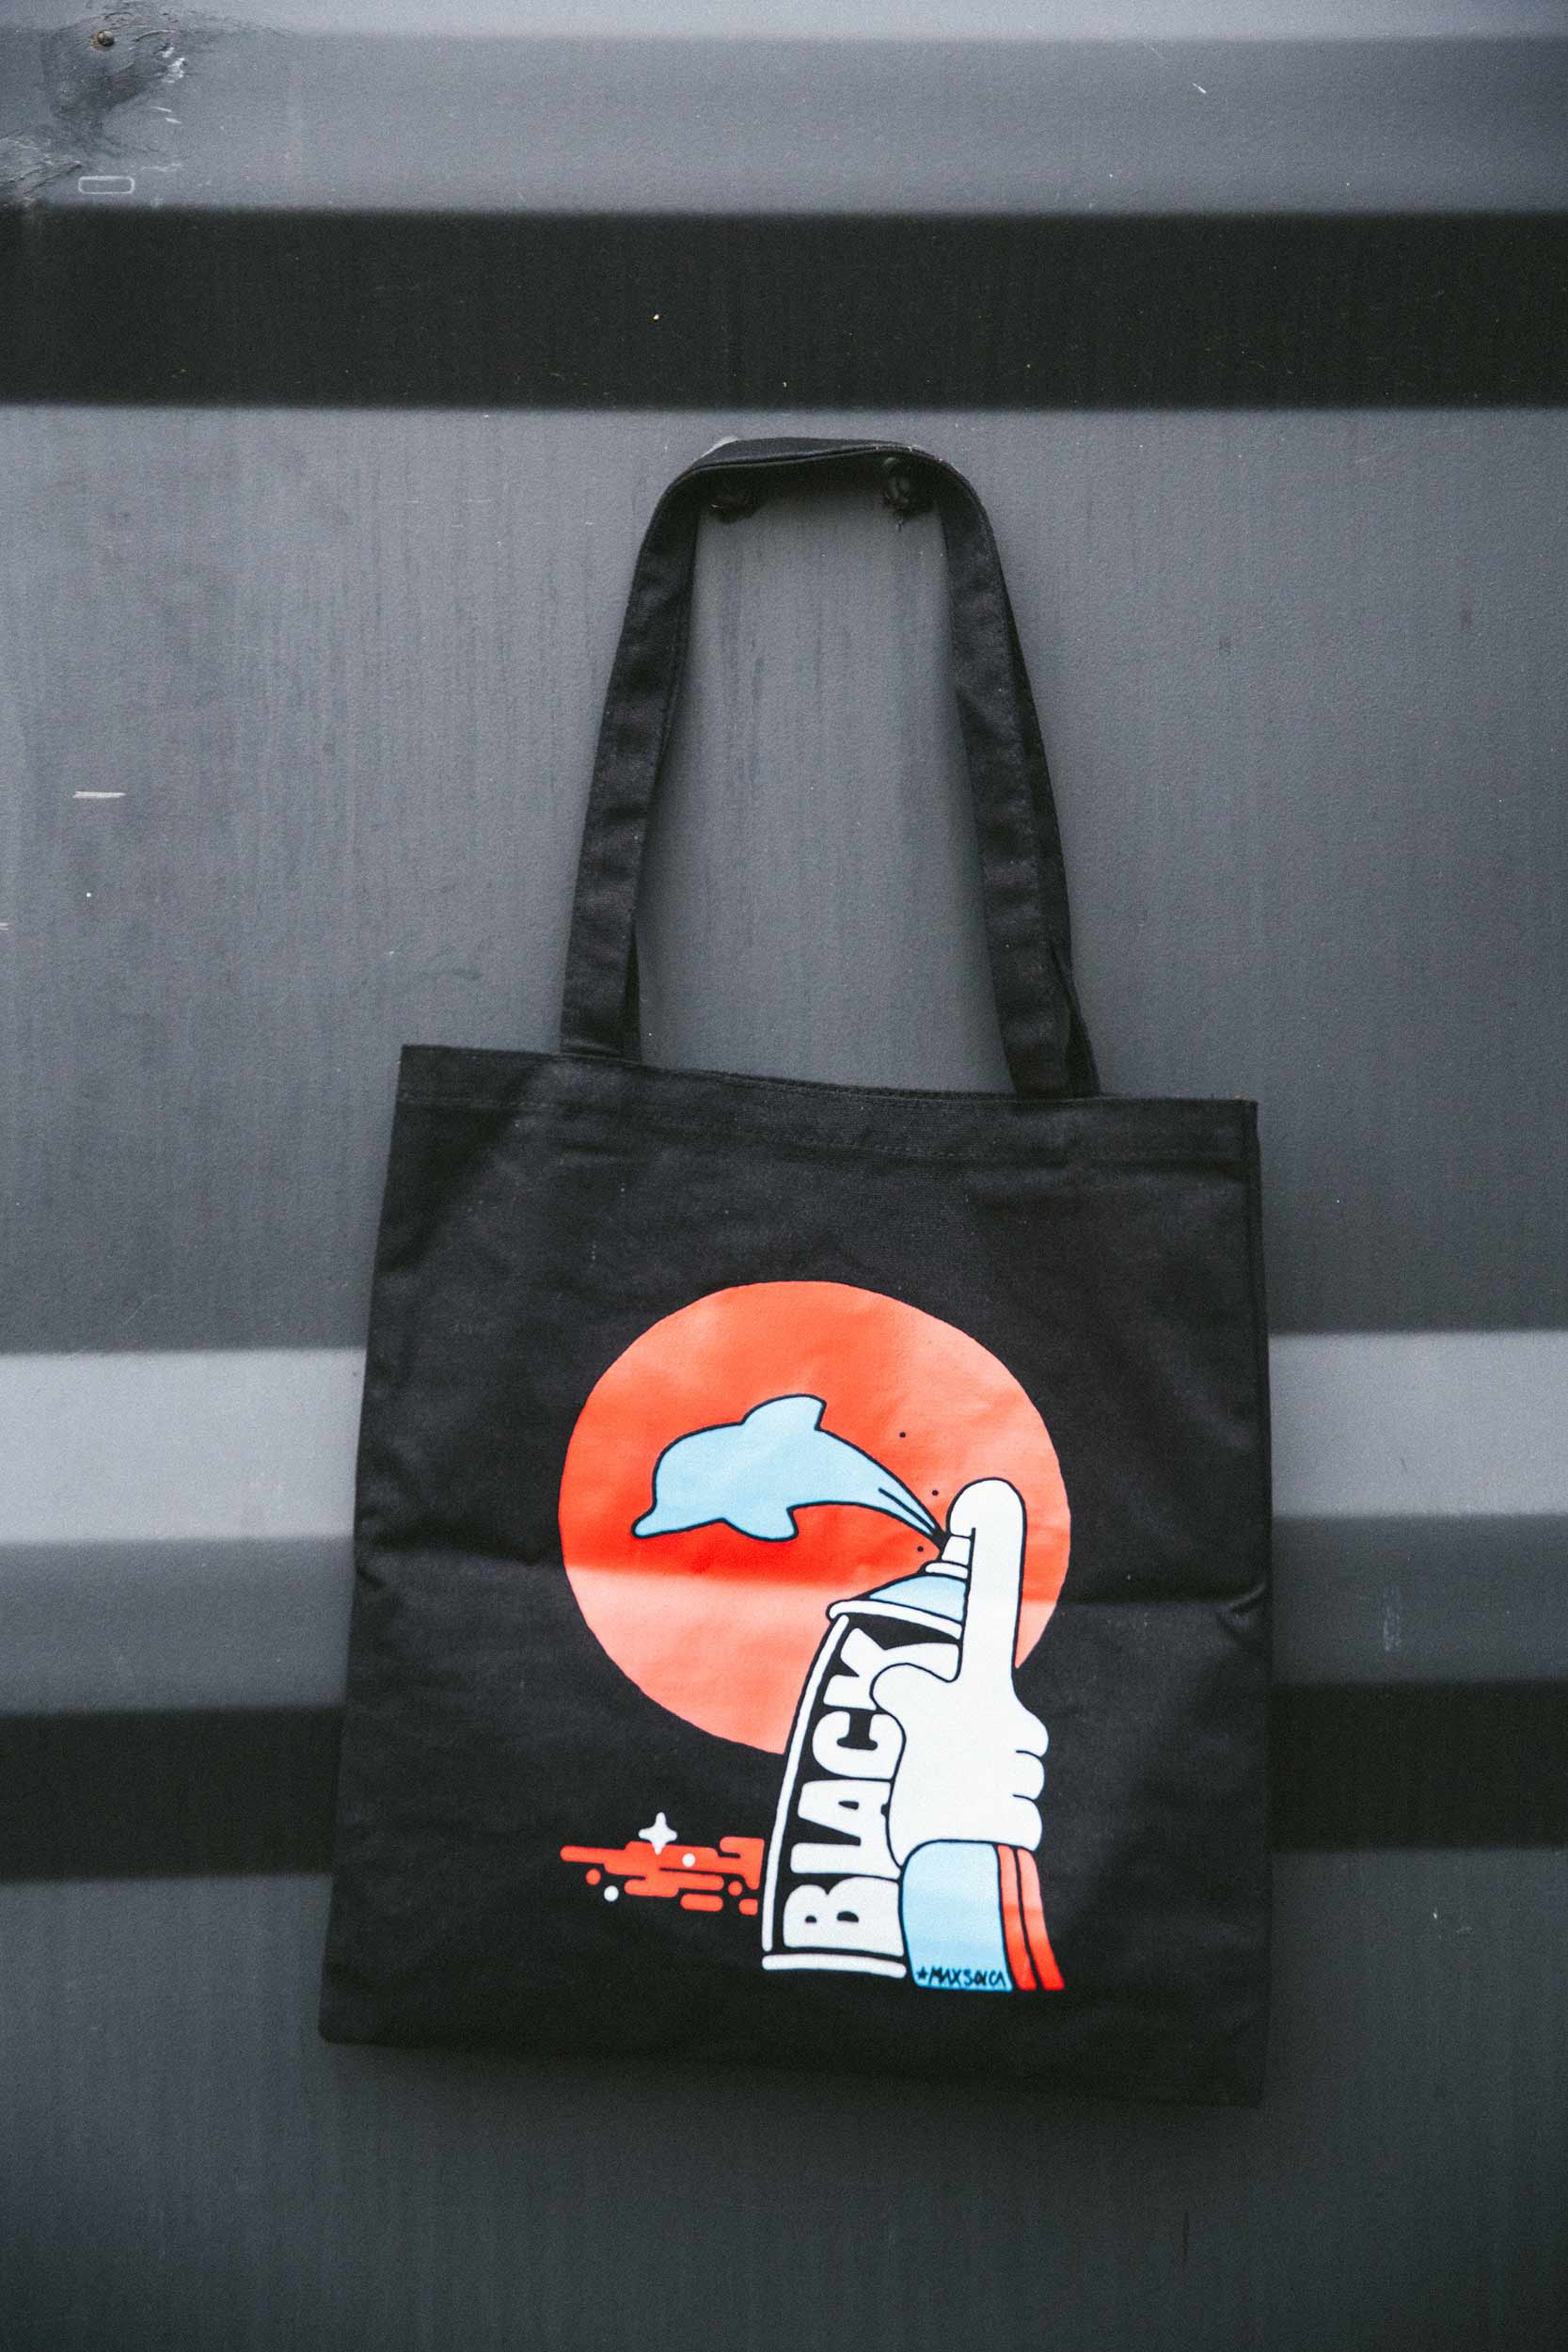 Montana Cotton Bag "Dolphin" by Max Solca